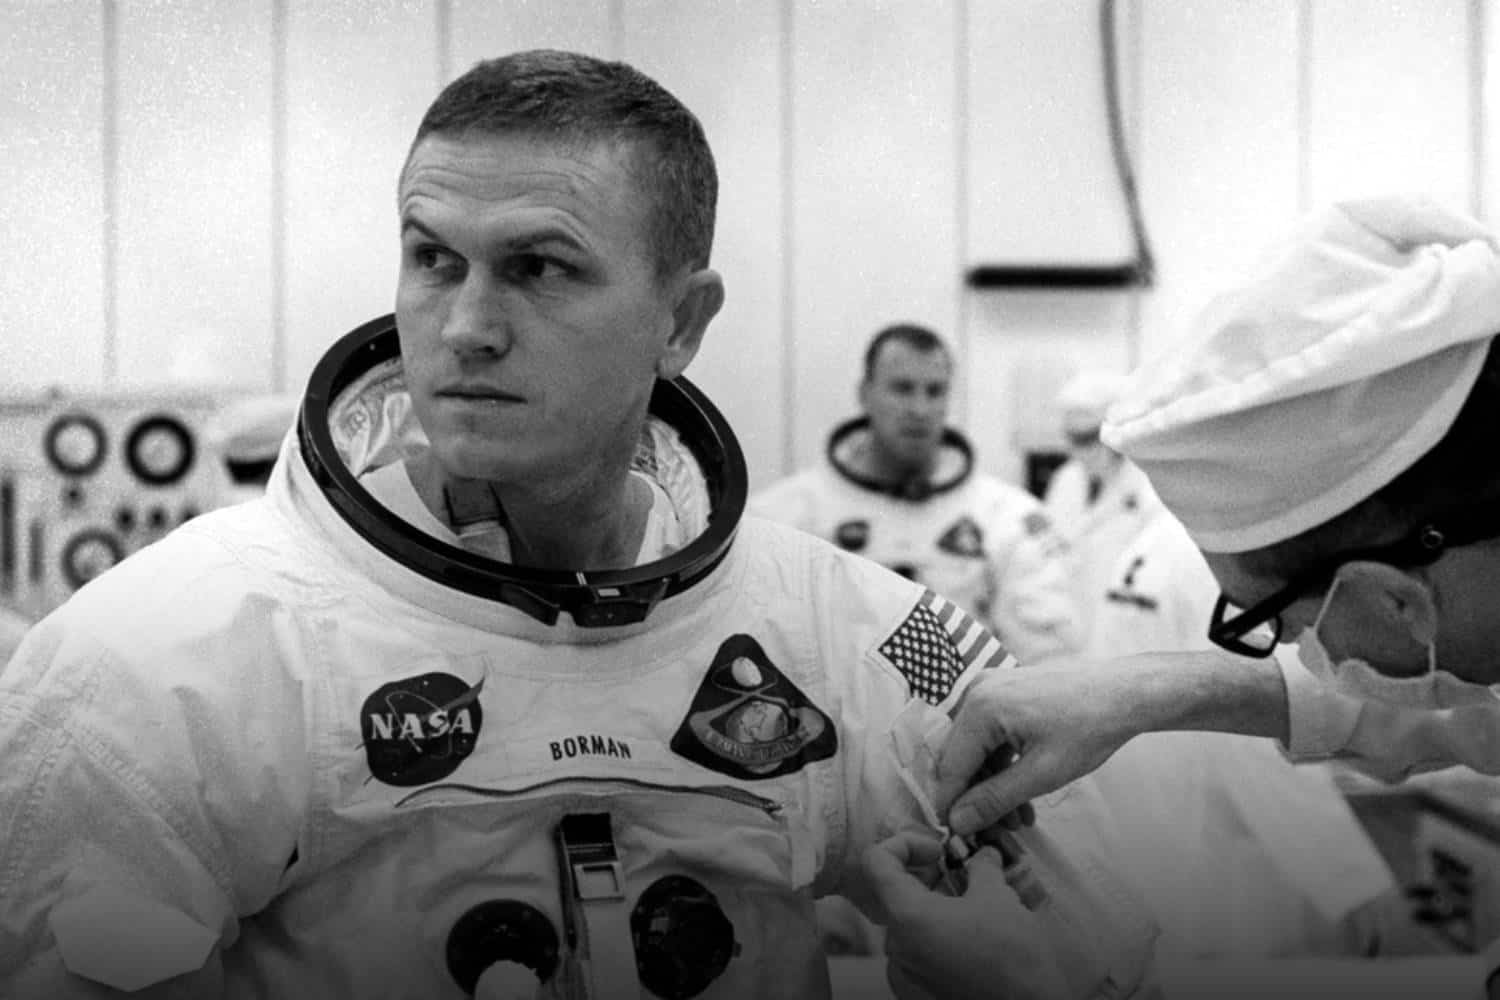 Remembering Frank Borman: A Pioneer in Space Exploration